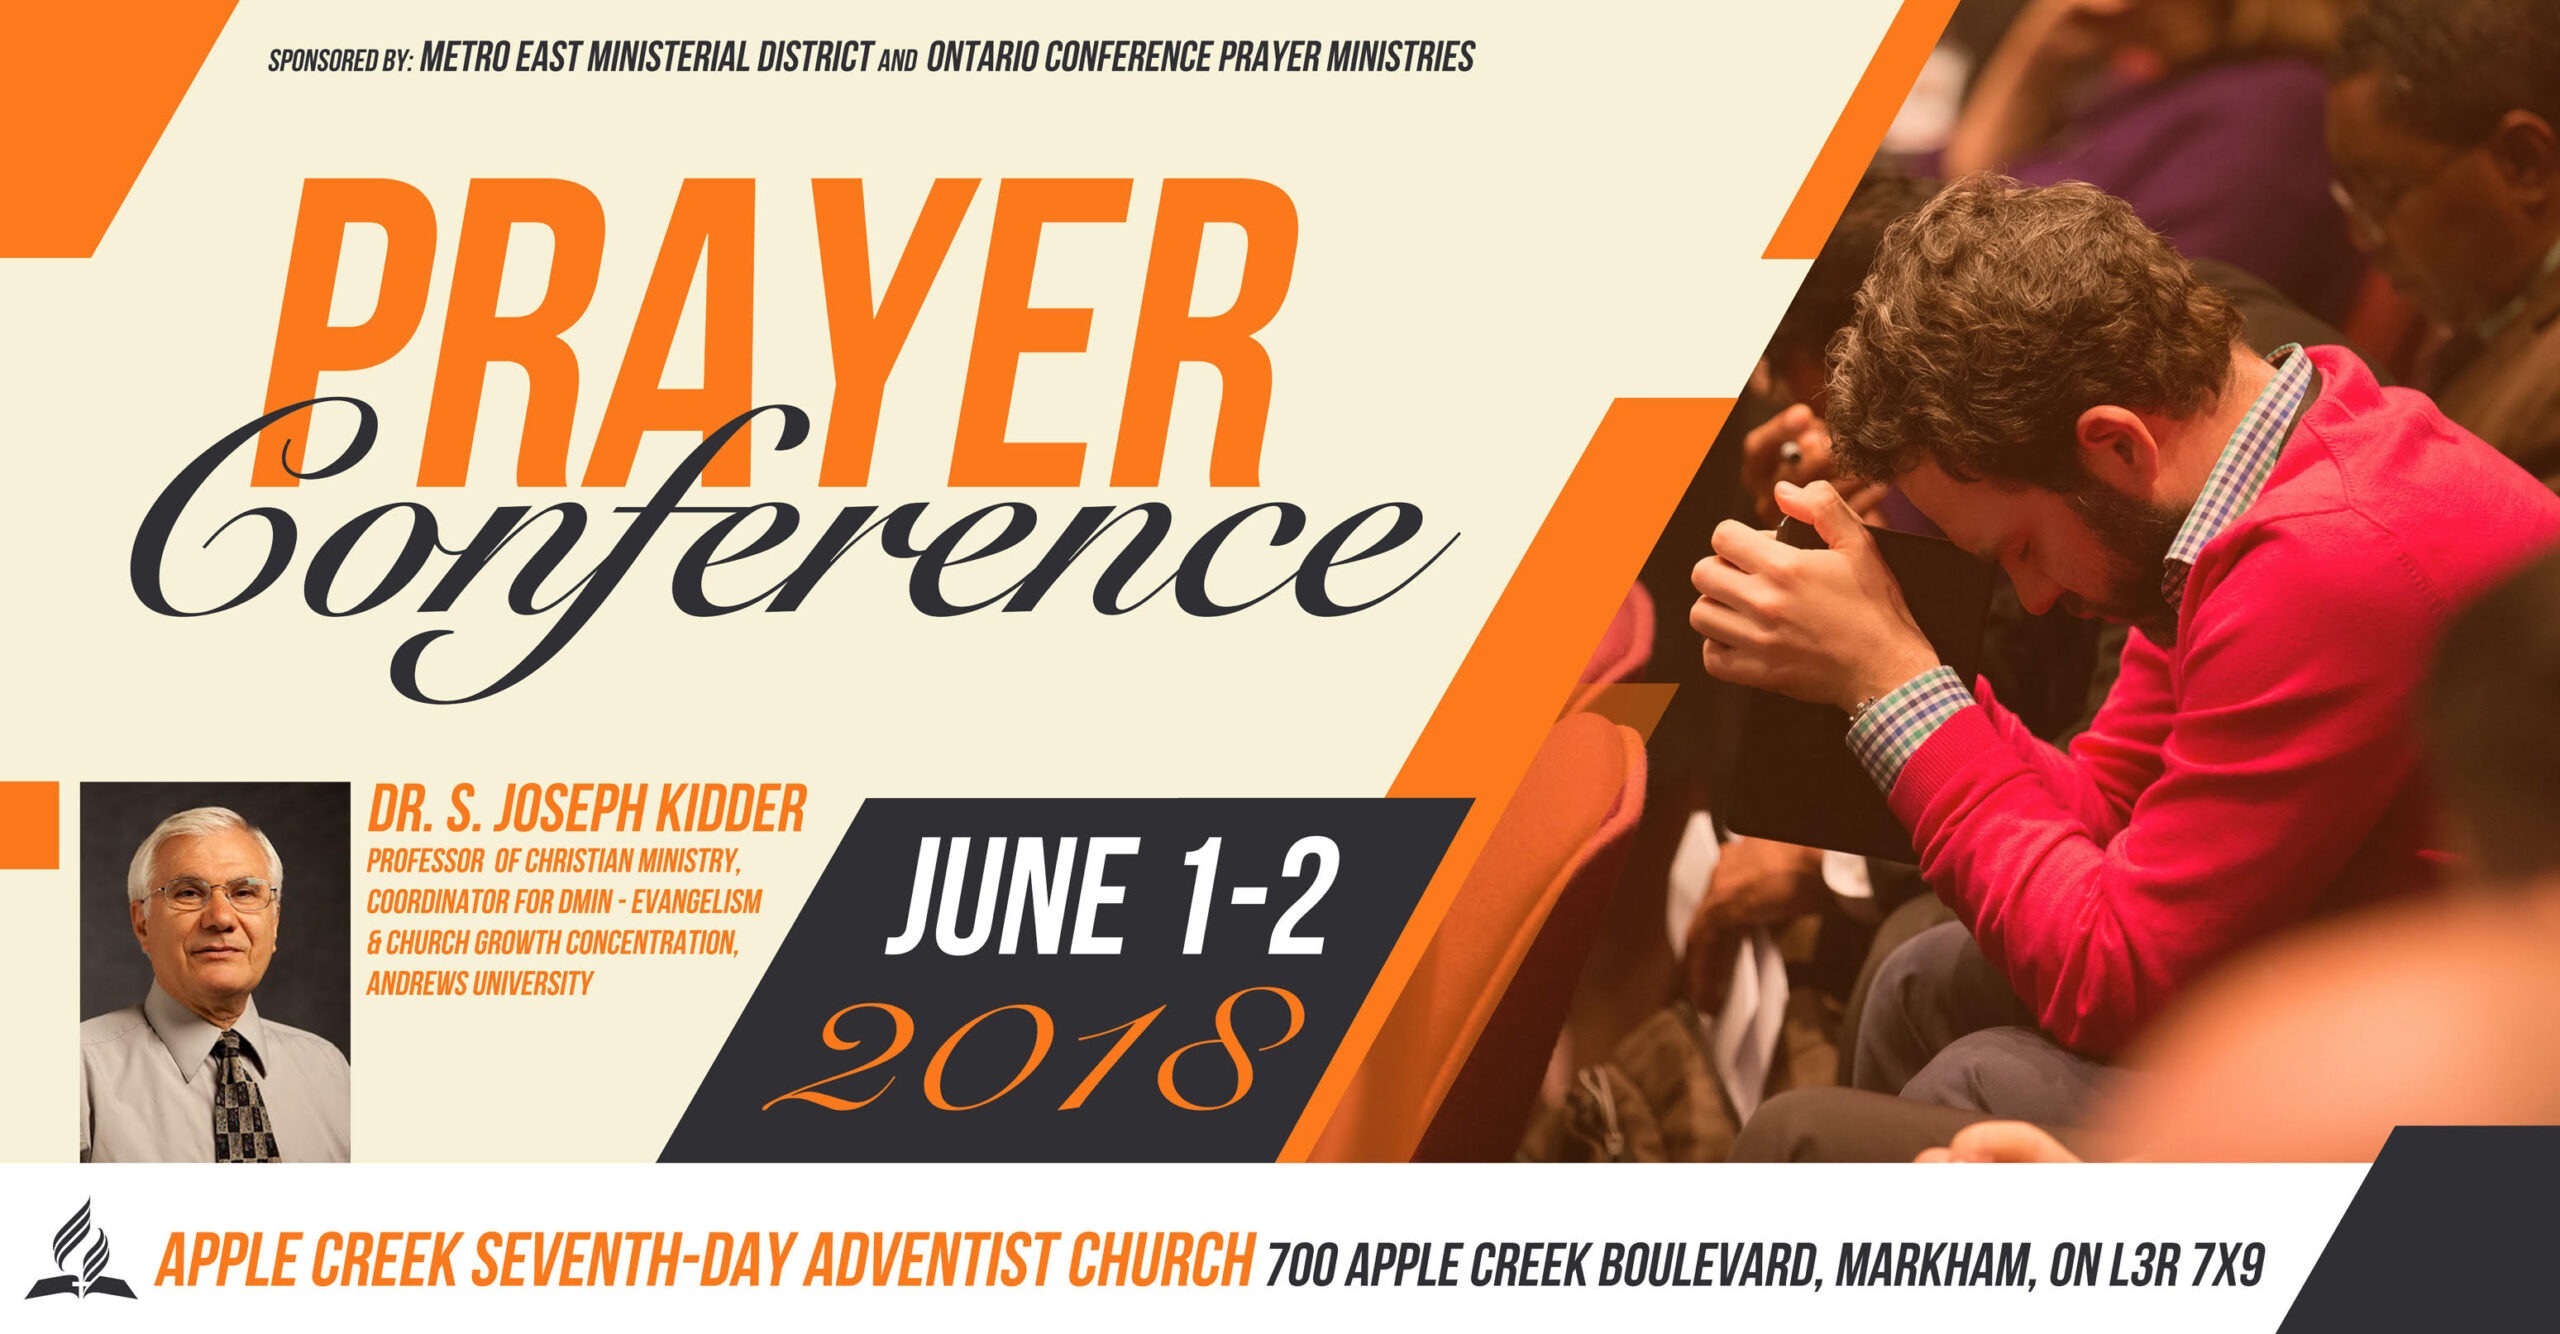 Metro East Ministerial District Prayer Conference